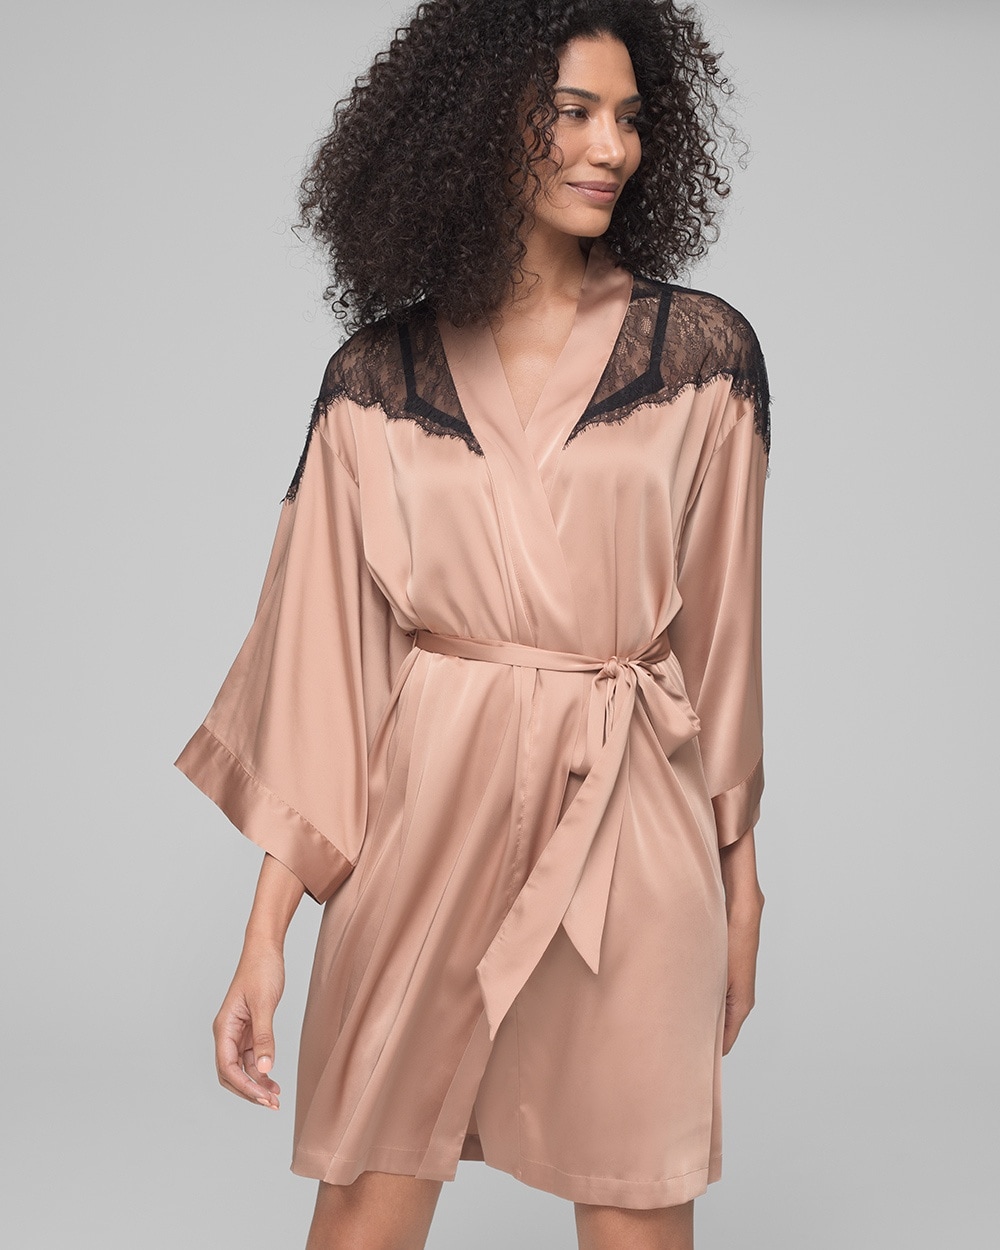 Satin Short Robe with Lace Trim Tawny Brown